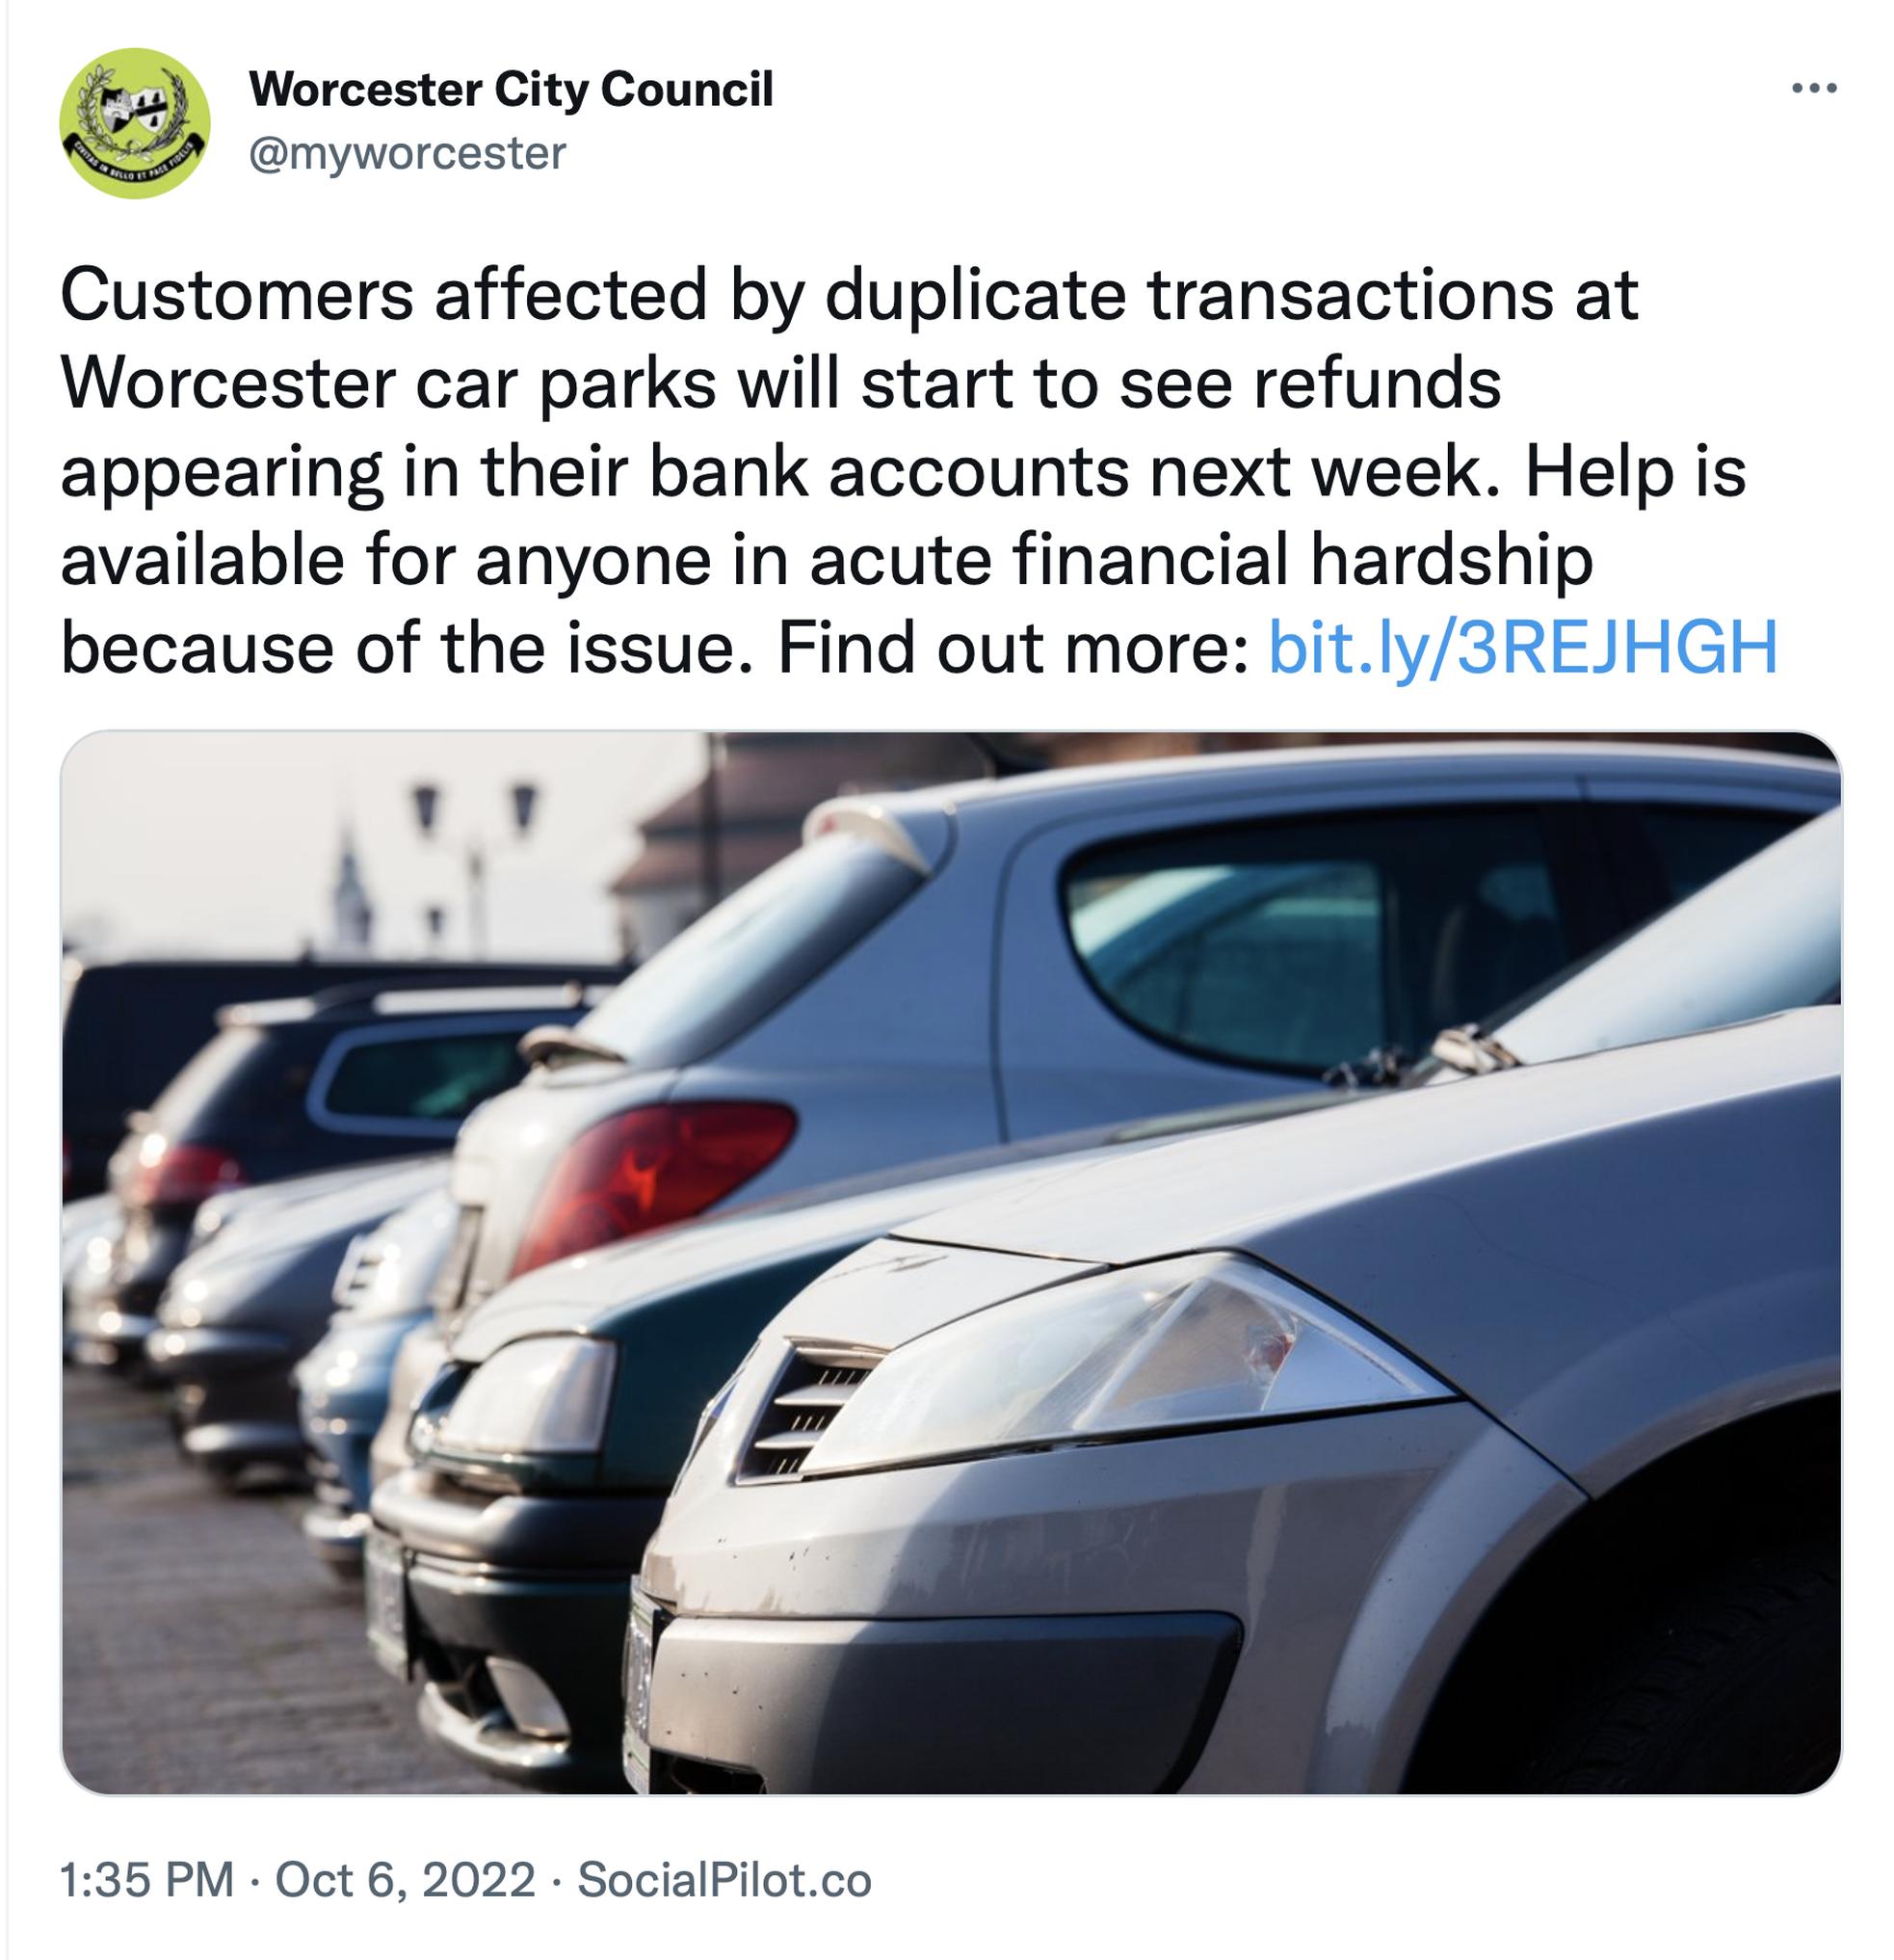 Worcester City Council has used social media to update affected drivers